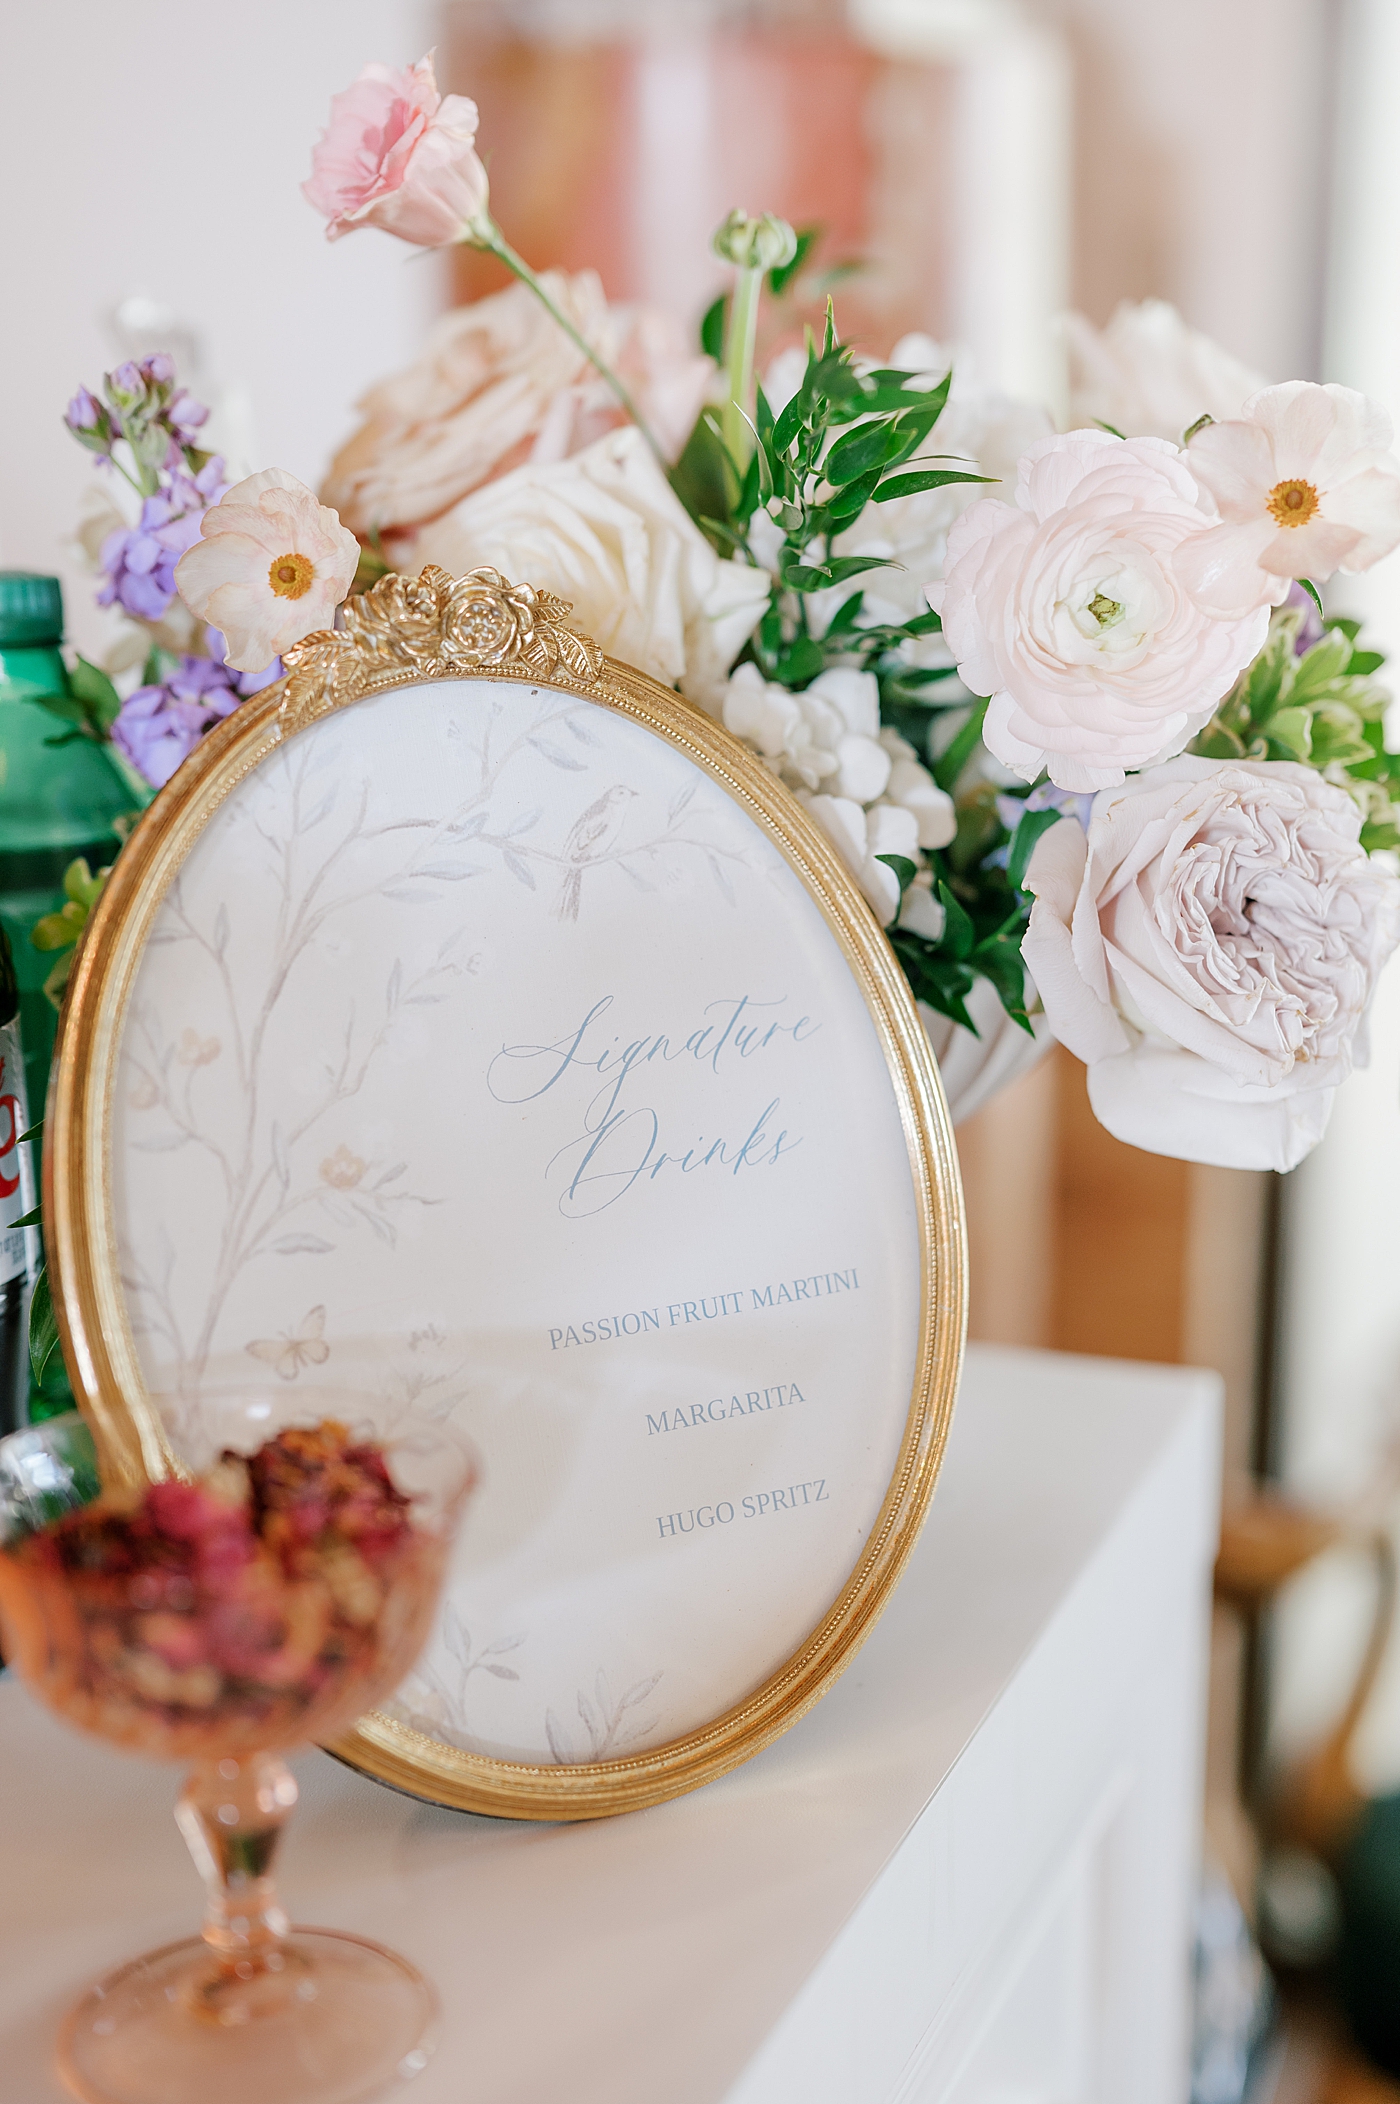 Custom wedding signage with florals | Image by Hope Helmuth Photography